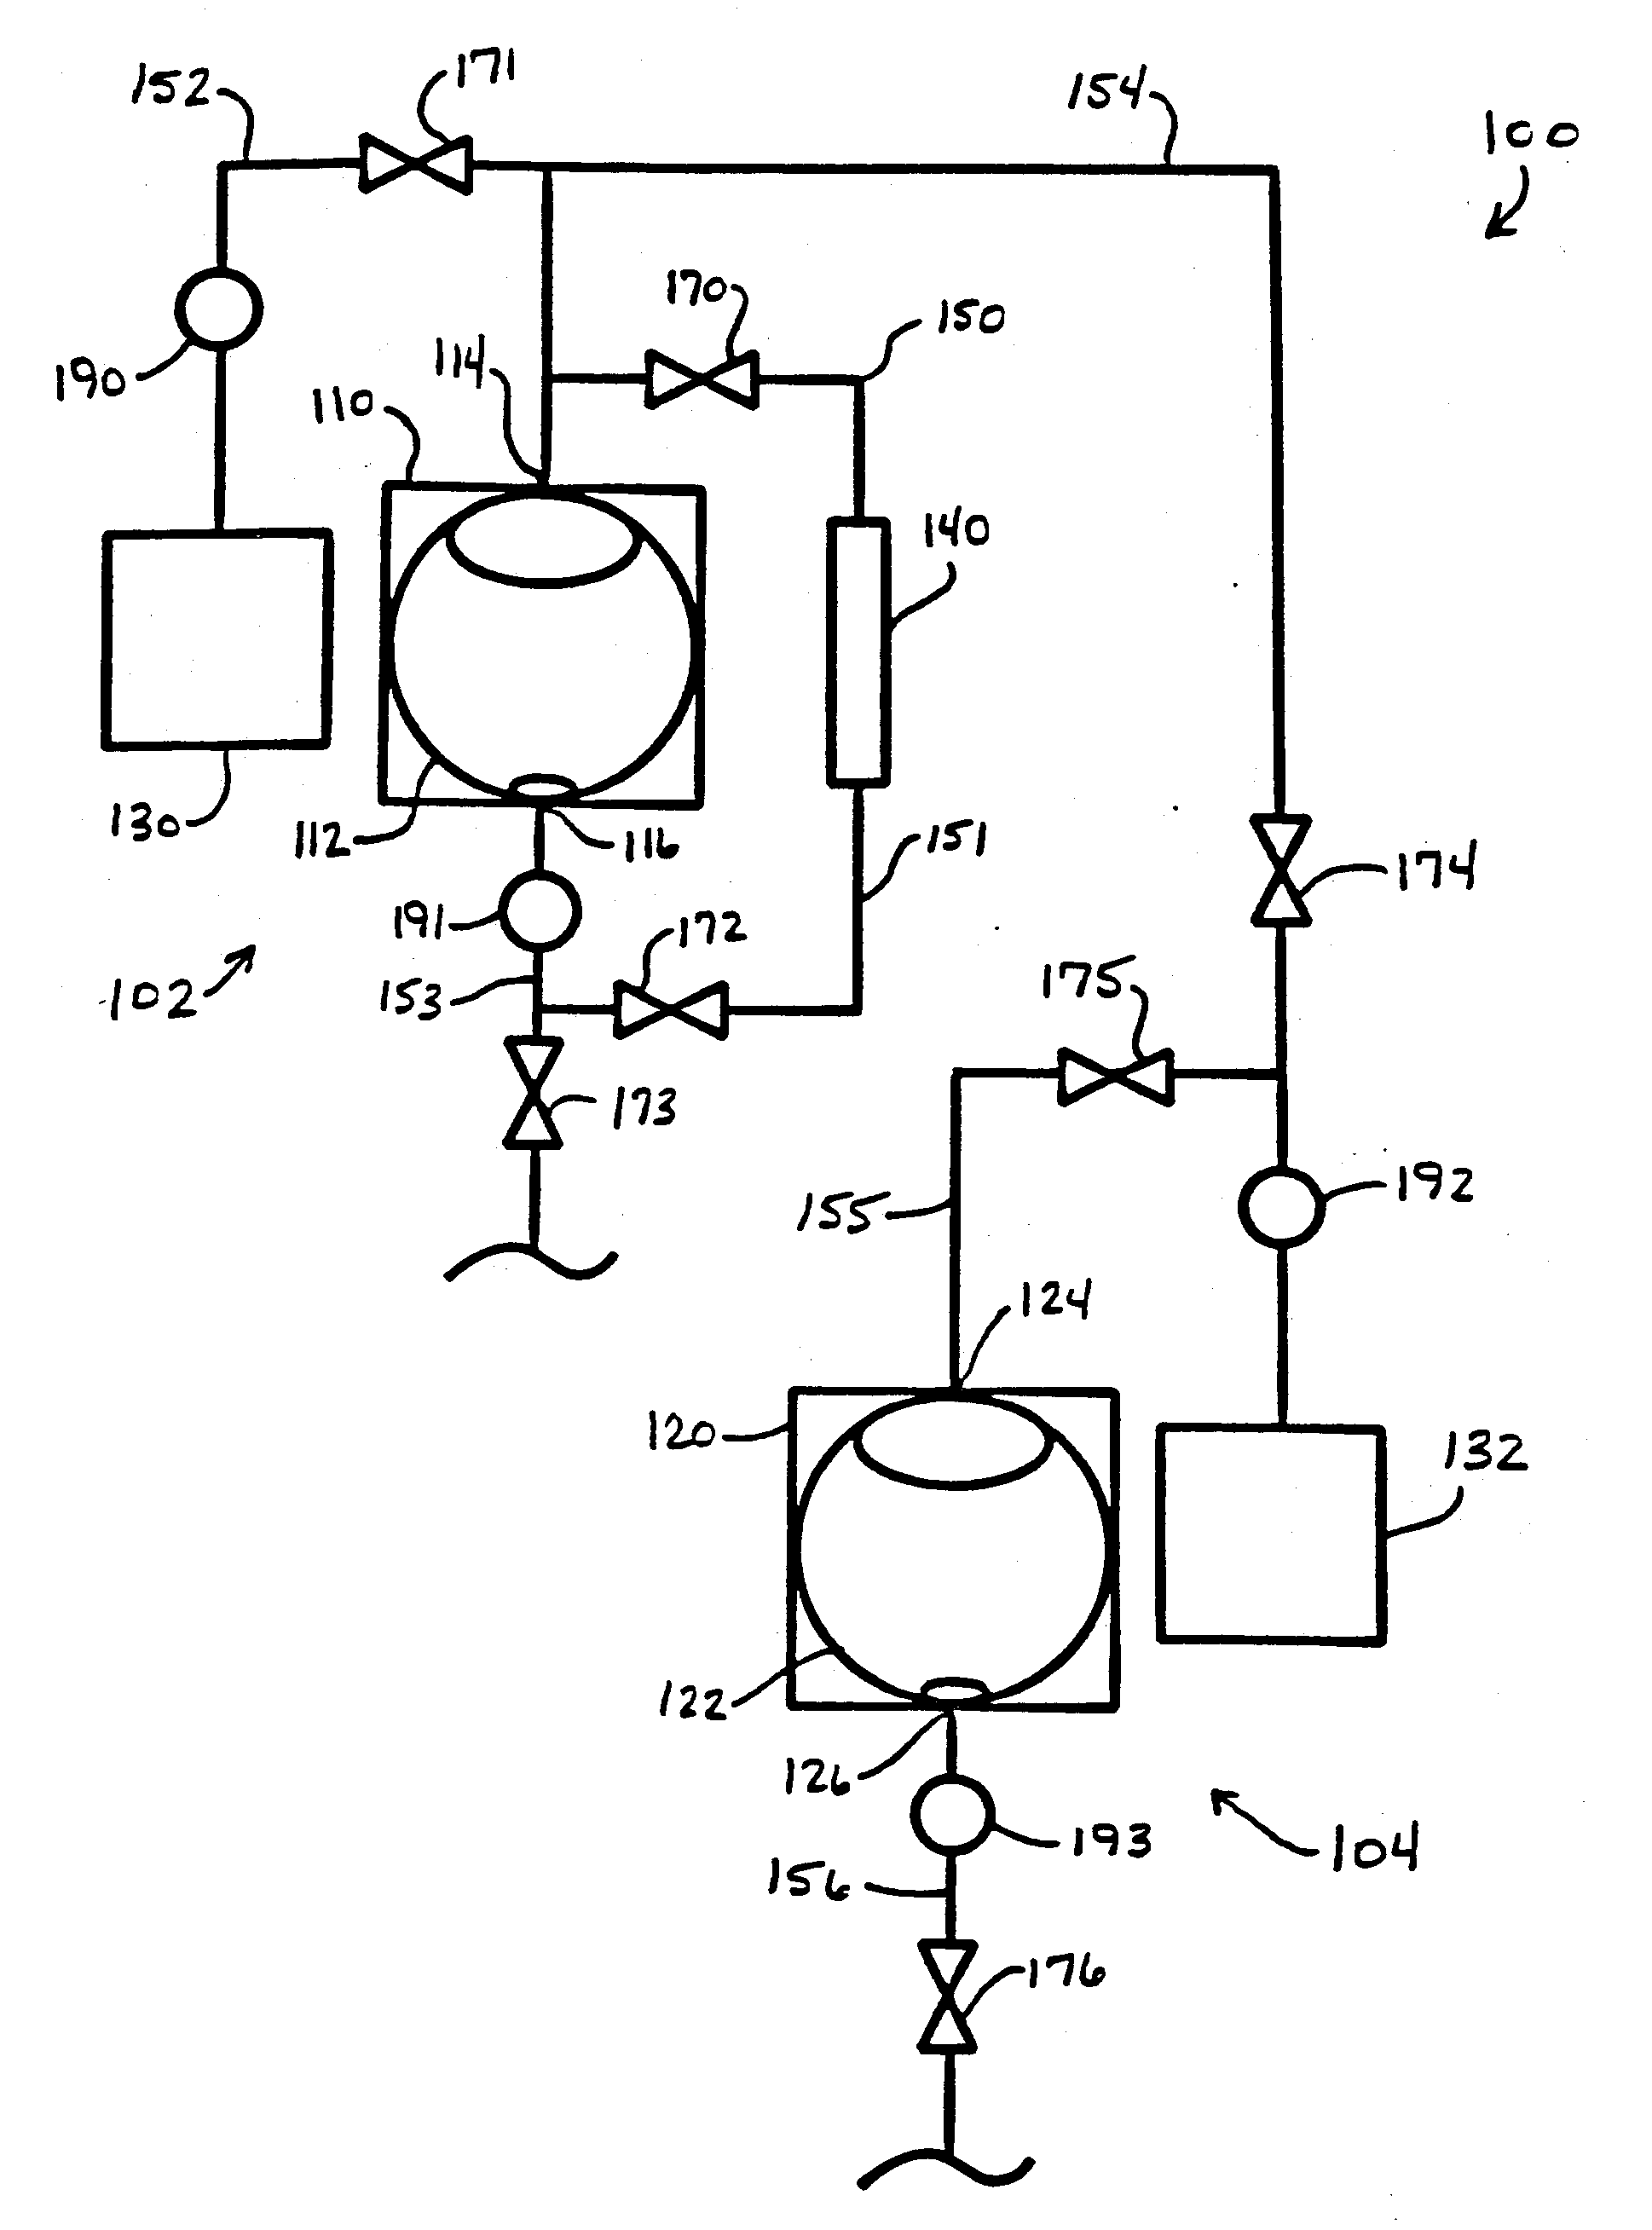 Cleaning system utilizing an organic and a pressurized fluid solvent